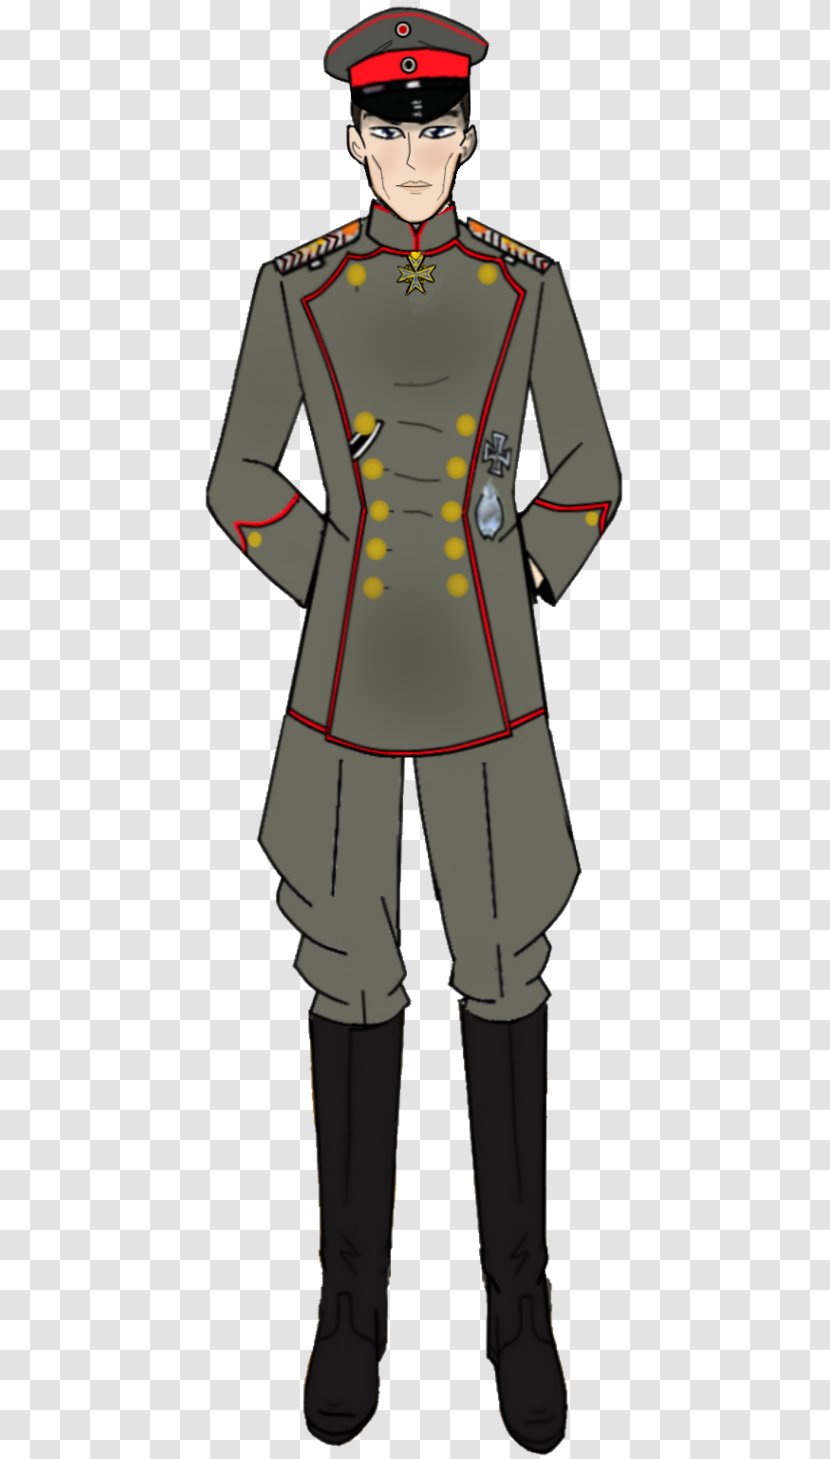 Army Officer Military Uniform Rank Police Transparent PNG